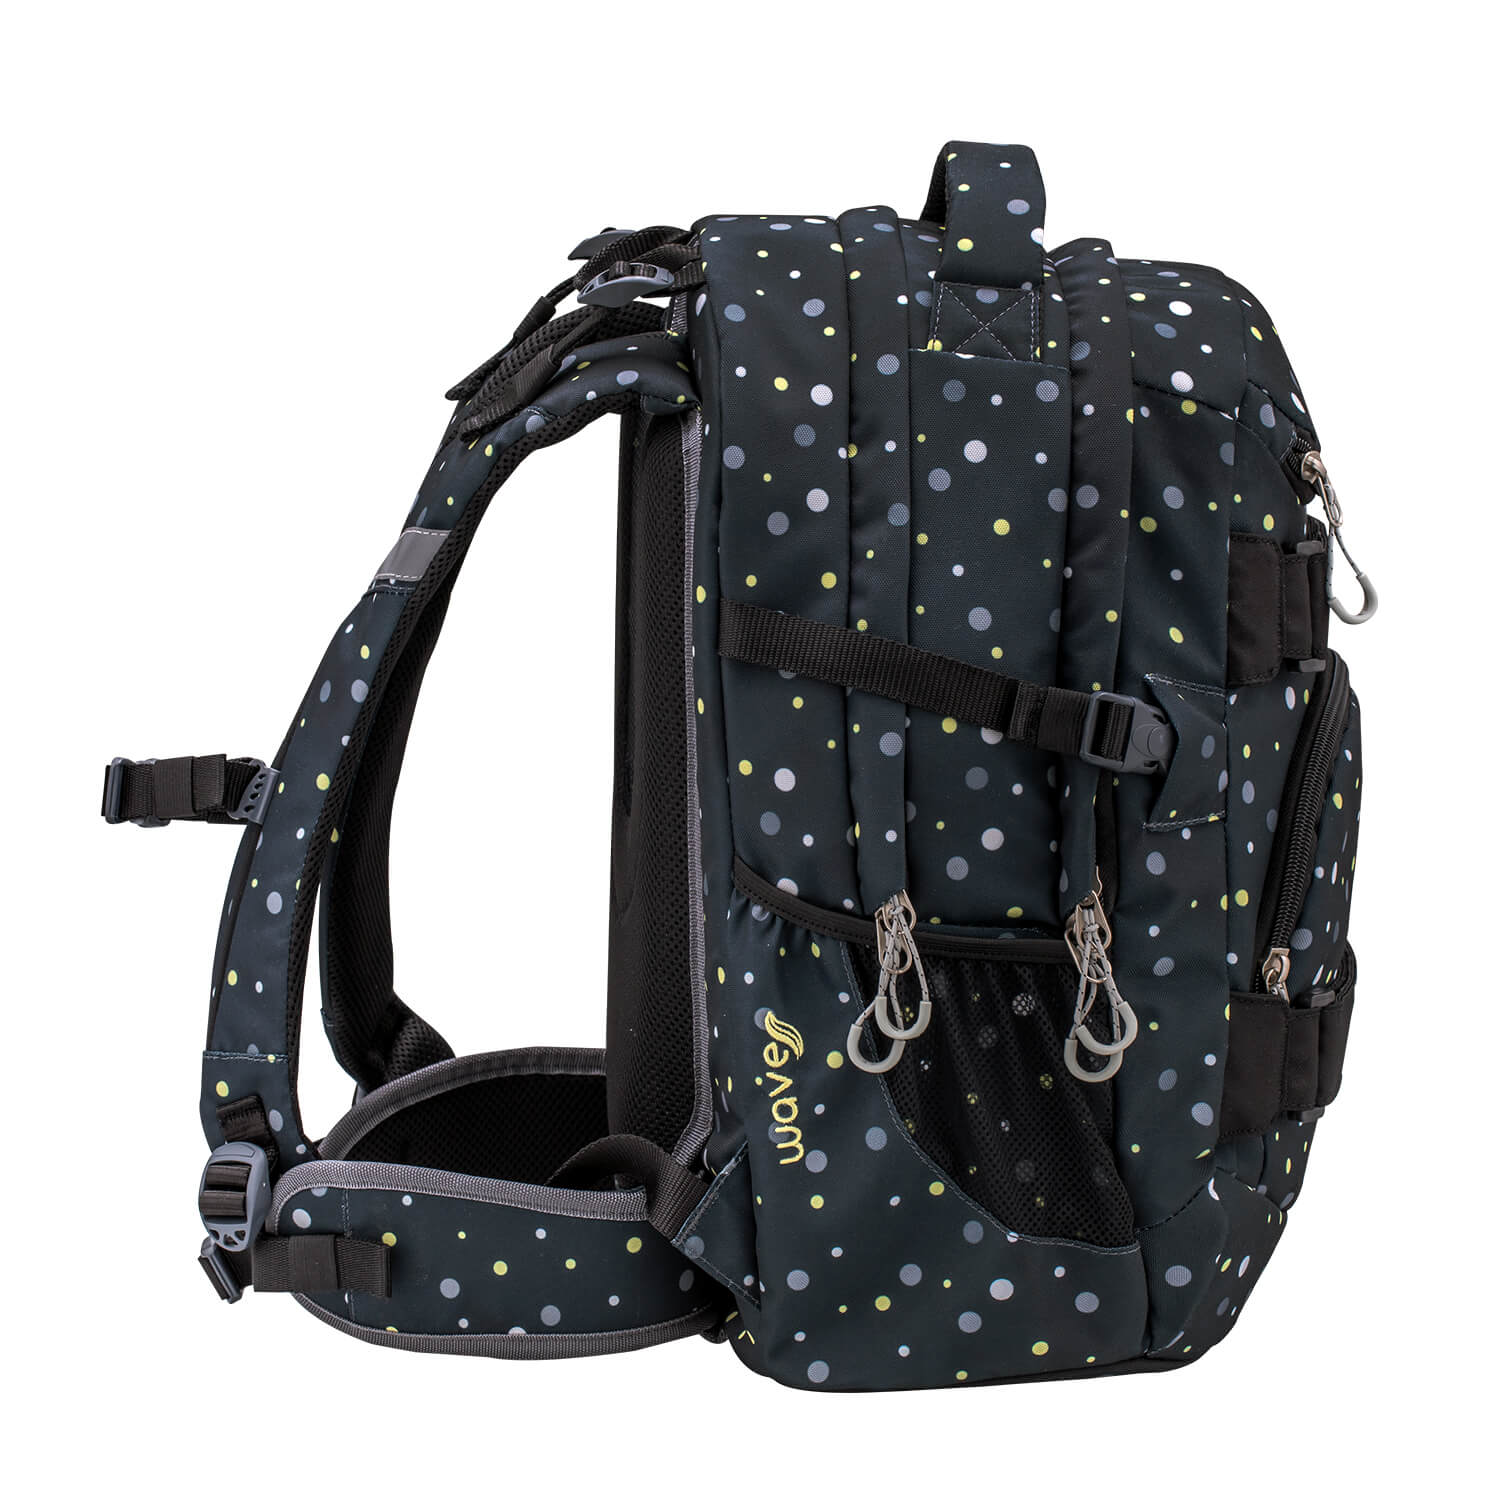 Wave Infinity Black And Yellow Dots school backpack